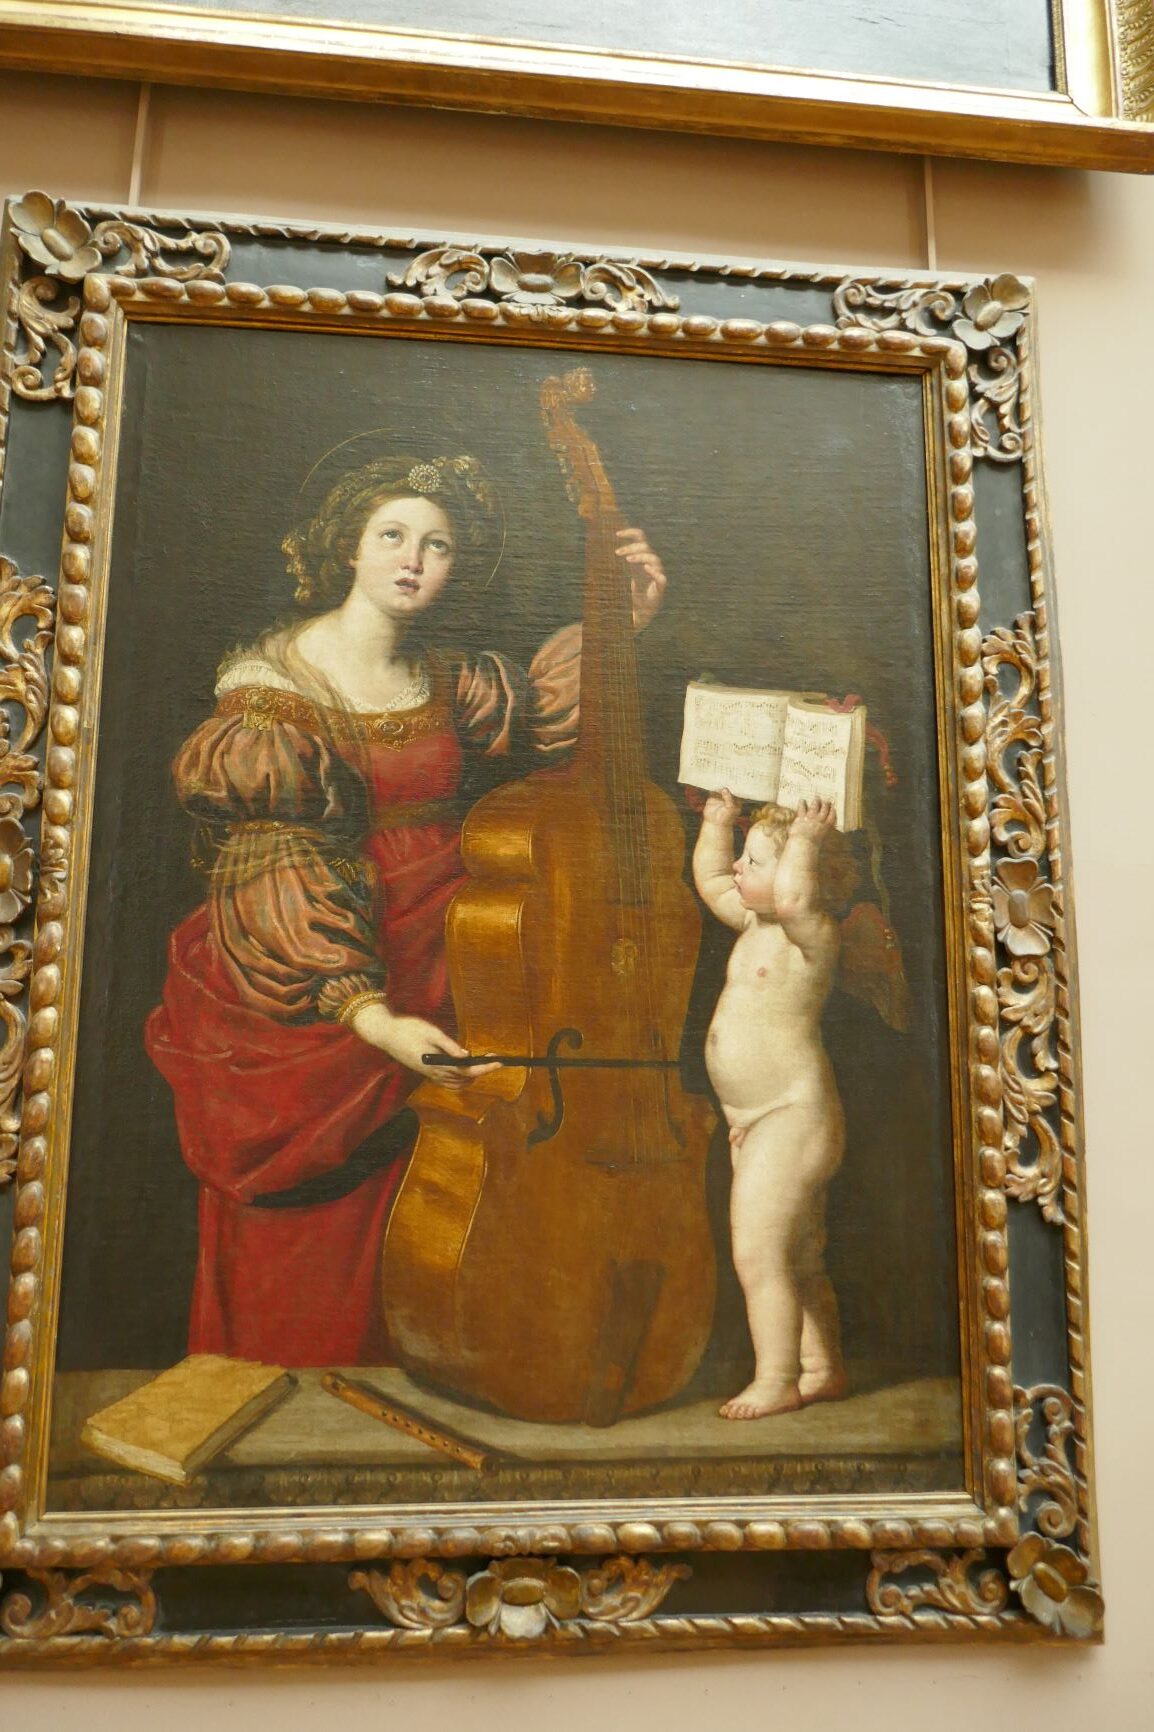 Musical Interlude, at the Louvre, June 27, 2019